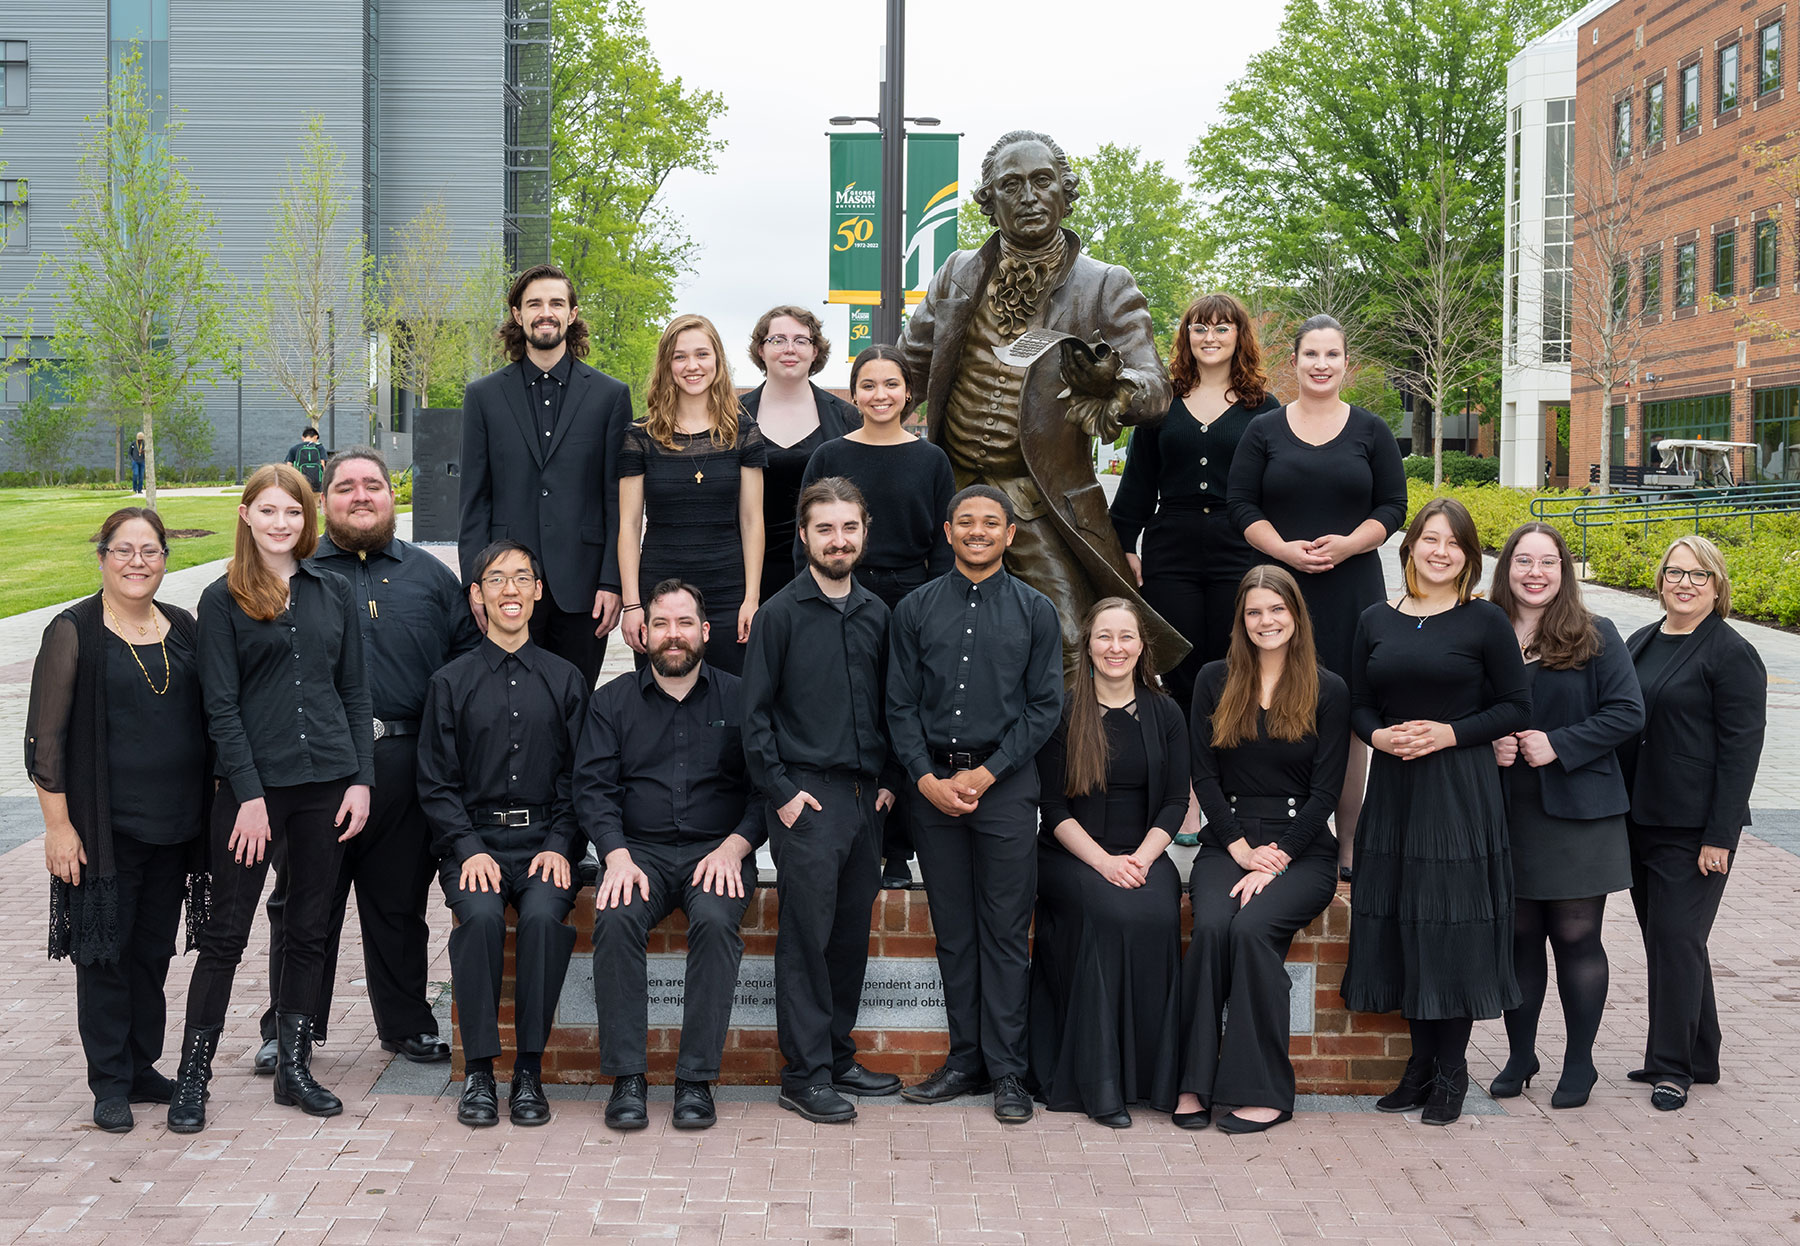 The University Singers posing by the statue of George Mason on the Fairfax campus.